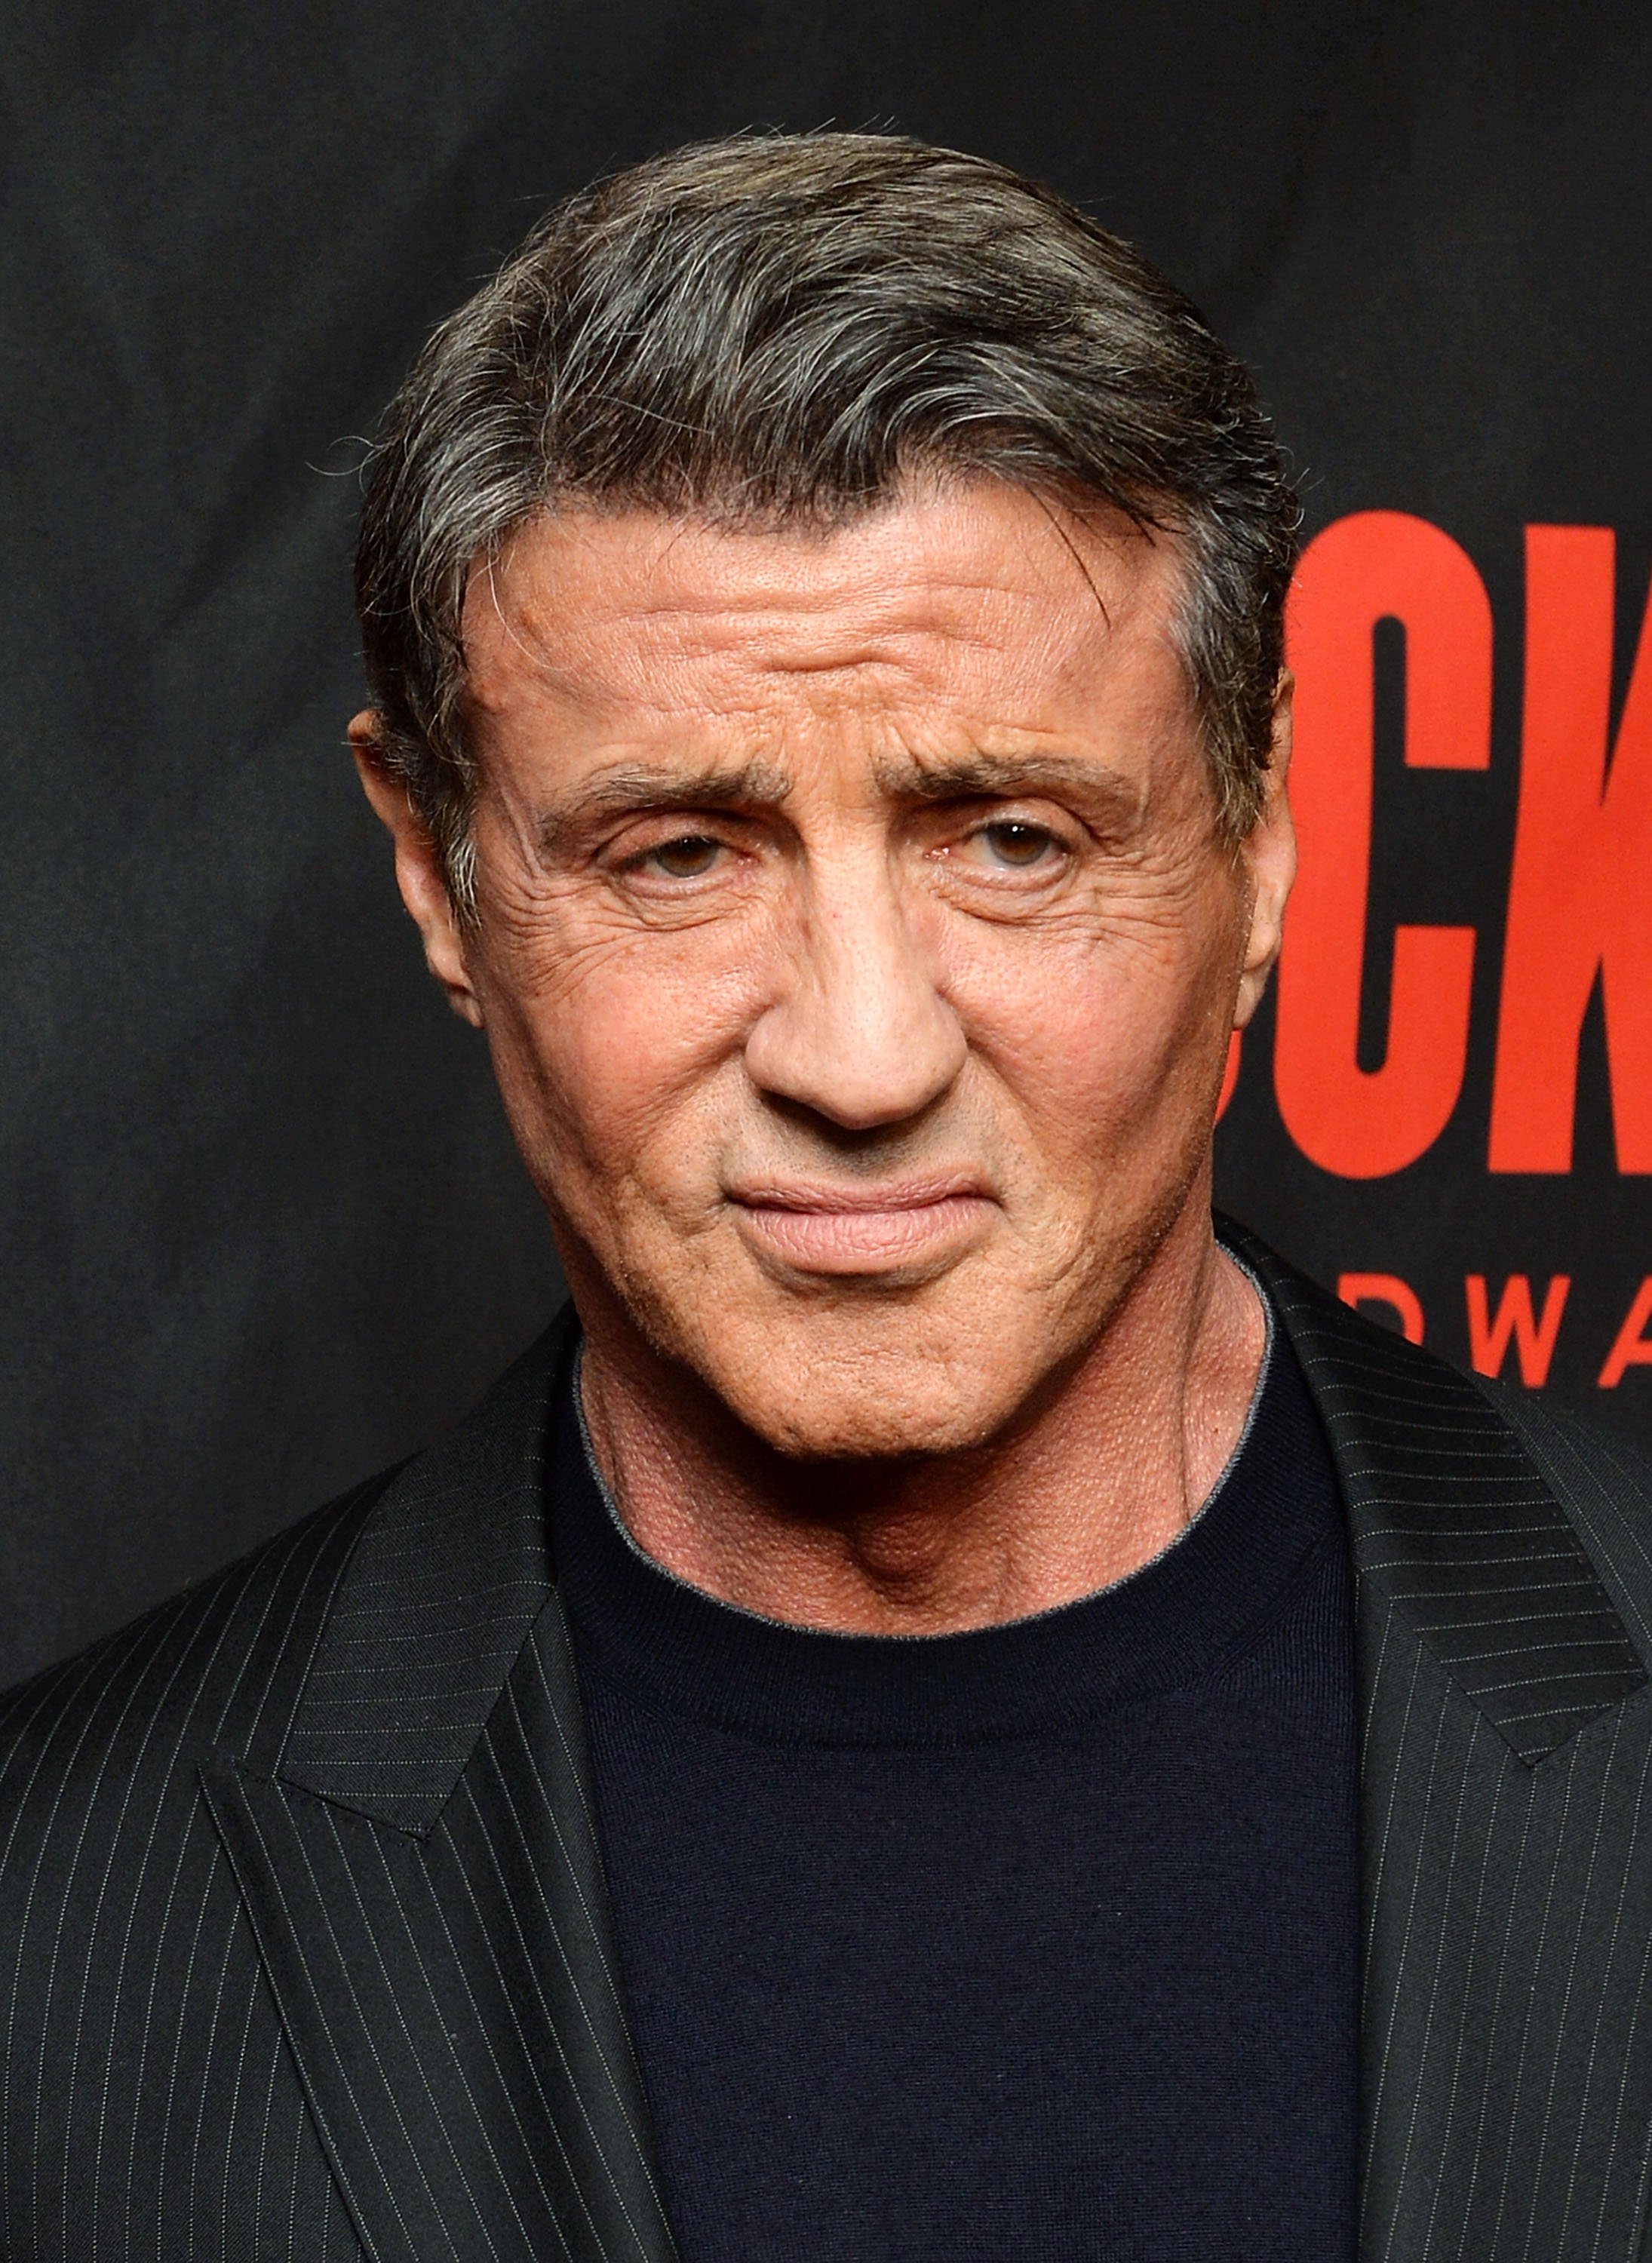 Sylvester Stallone attends the "Rocky" Broadway opening night after-party at Roseland Ballroom on March 13, 2014 in New York City | Source: Getty Images